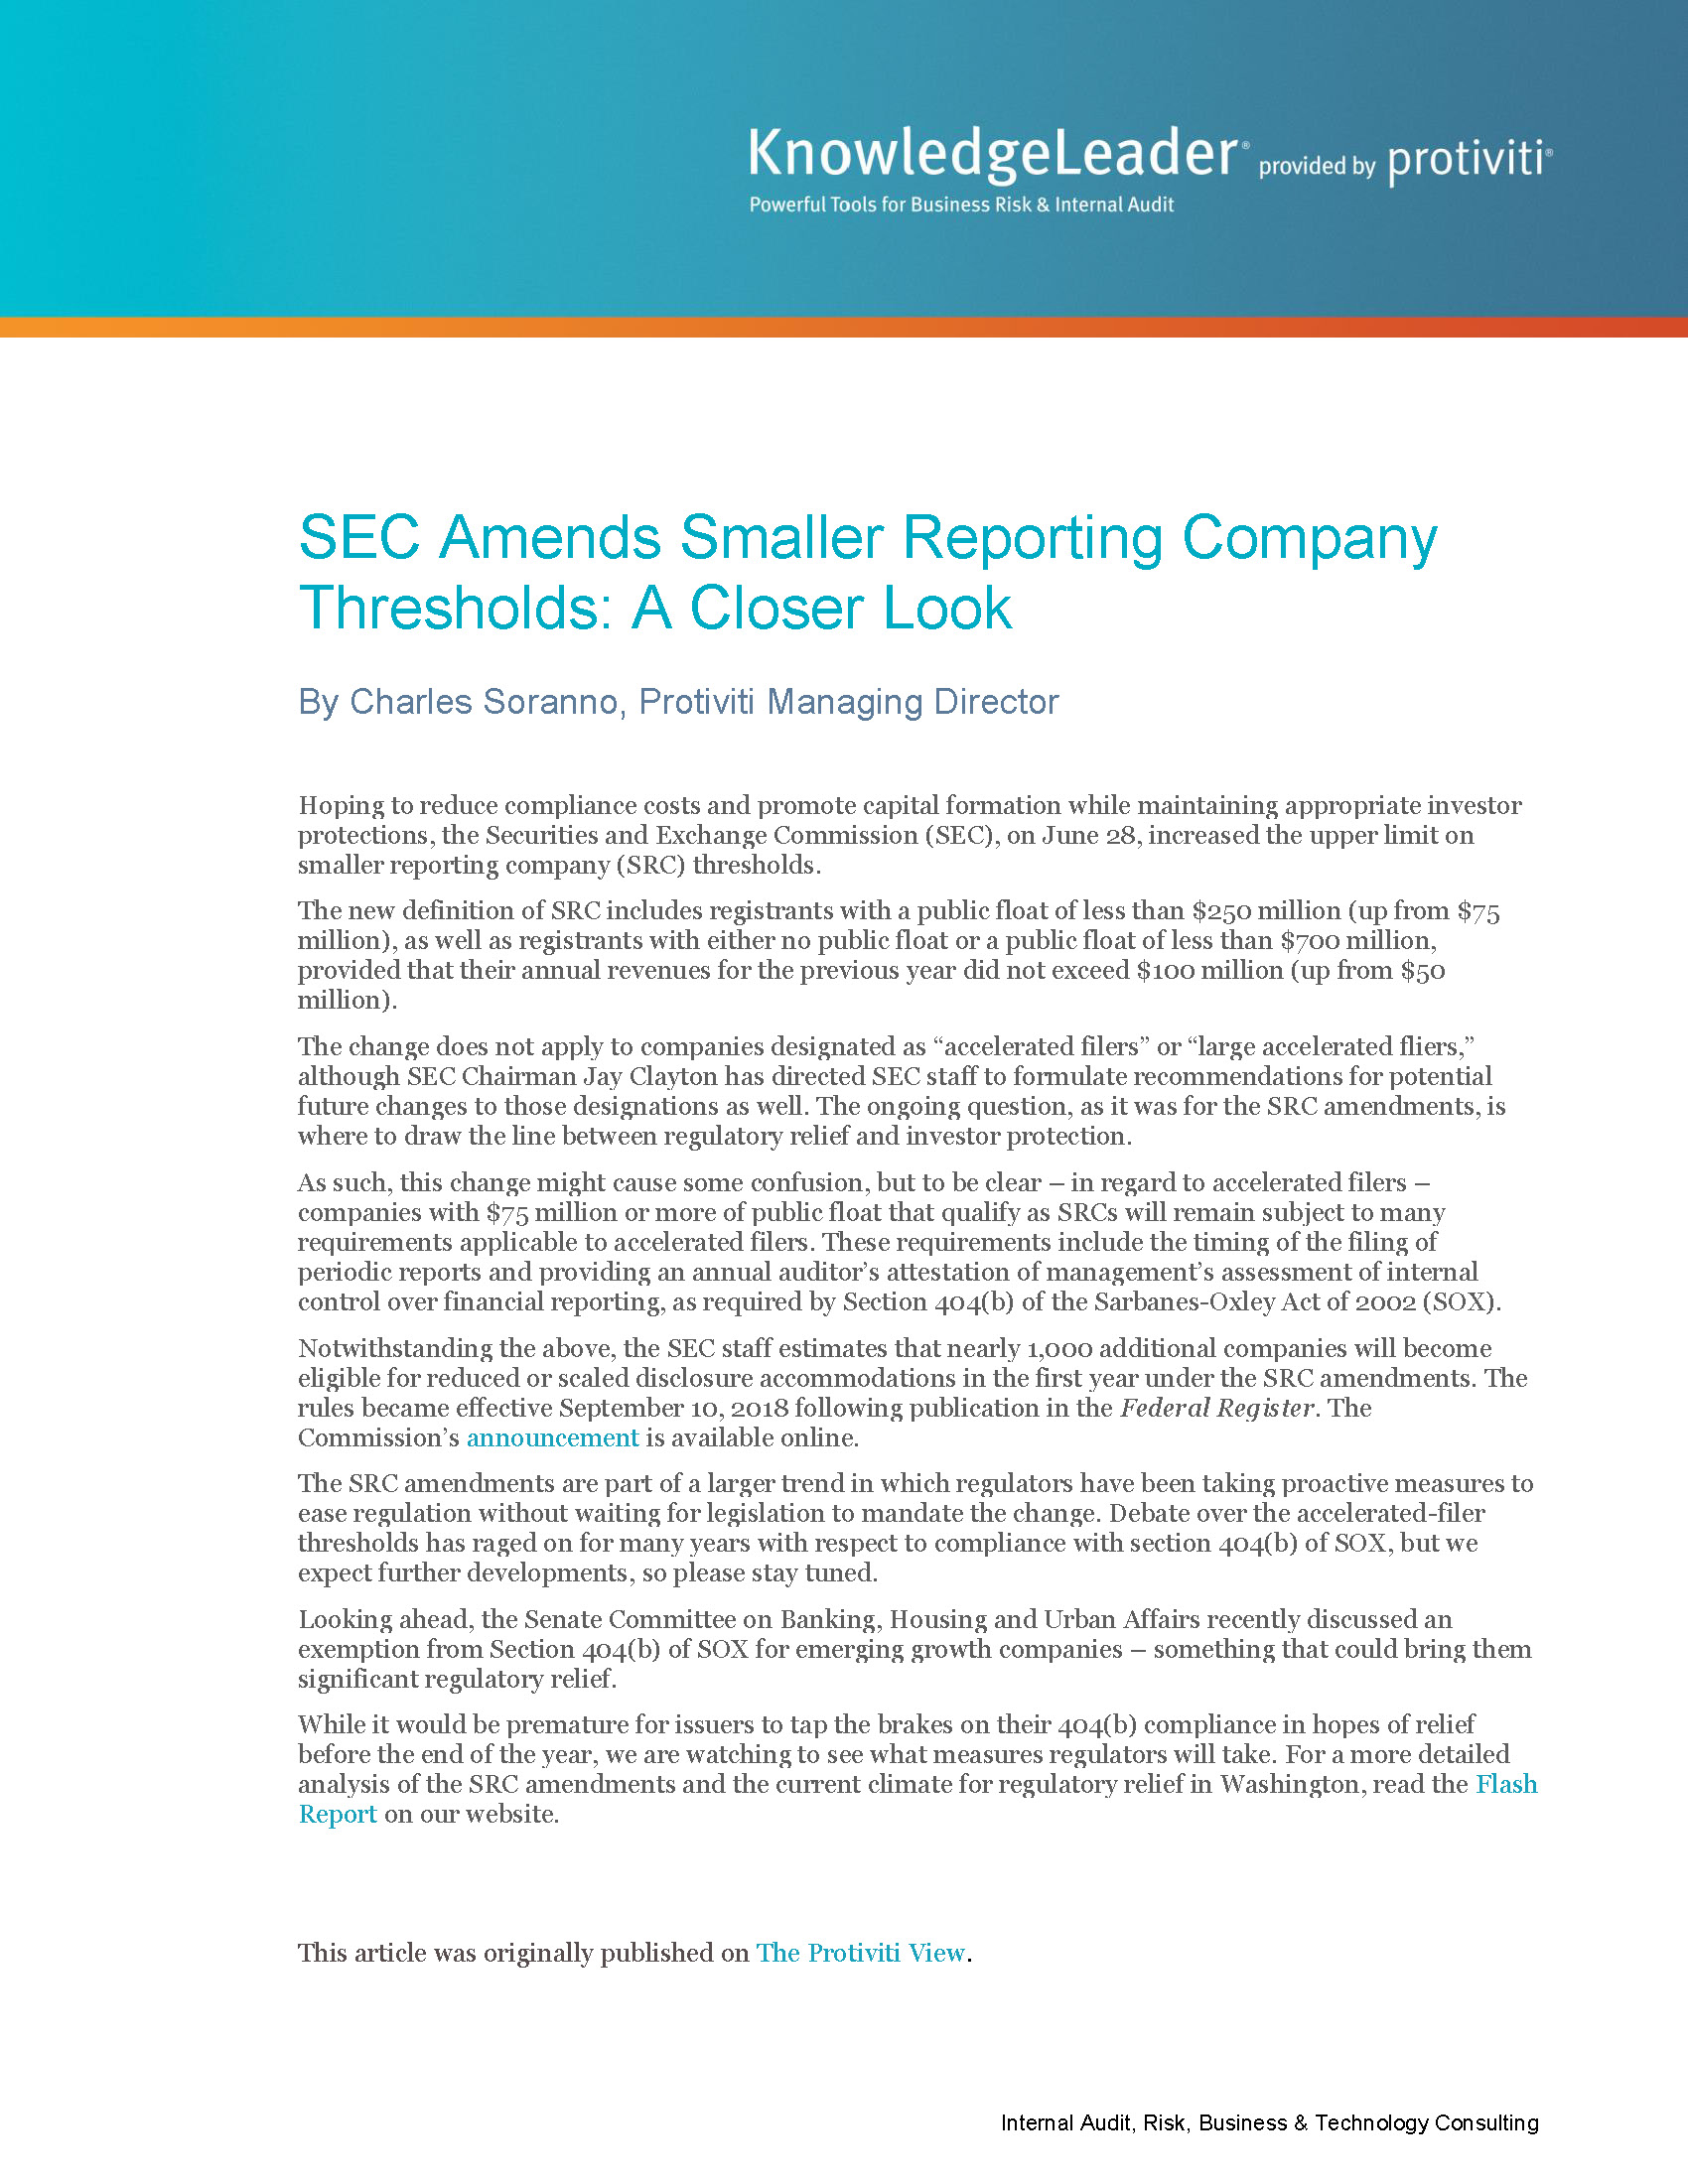 Screenshot of the first page of SEC Amends Smaller Reporting Company Thresholds A Closer Look